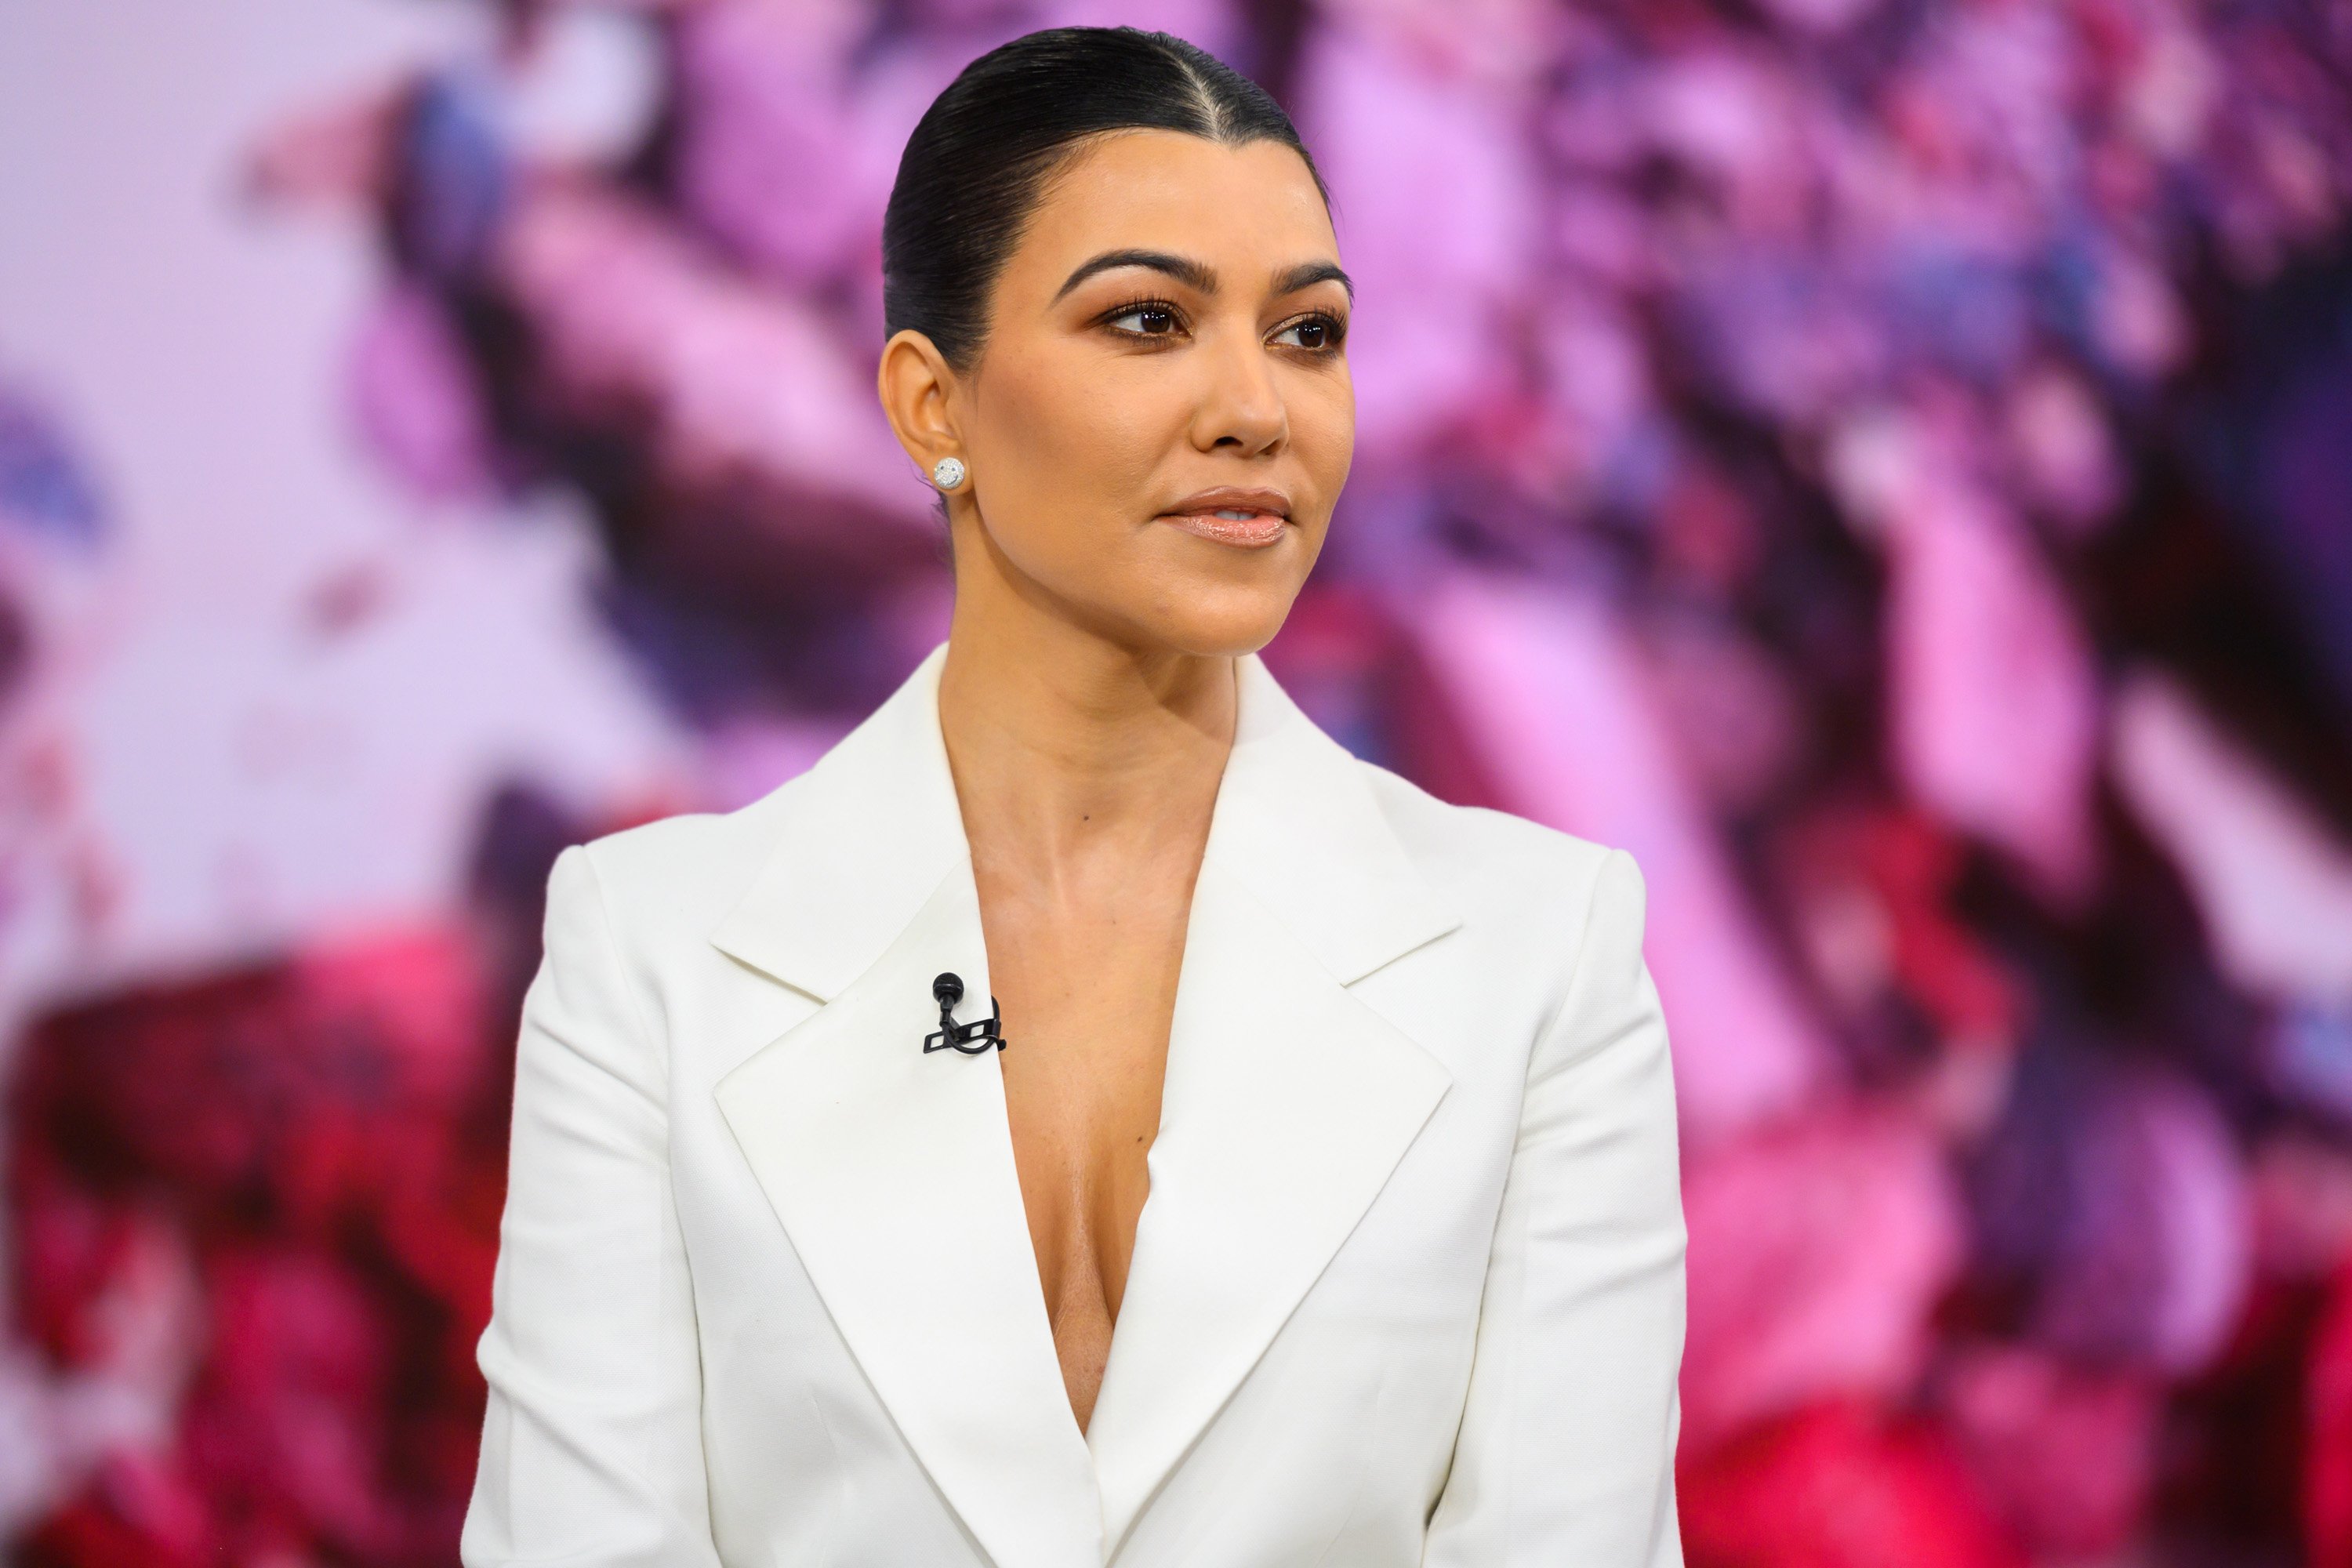 Kourtney Kardashian during her "Today" show appearance on February 7, 2019. | Source: Getty Images